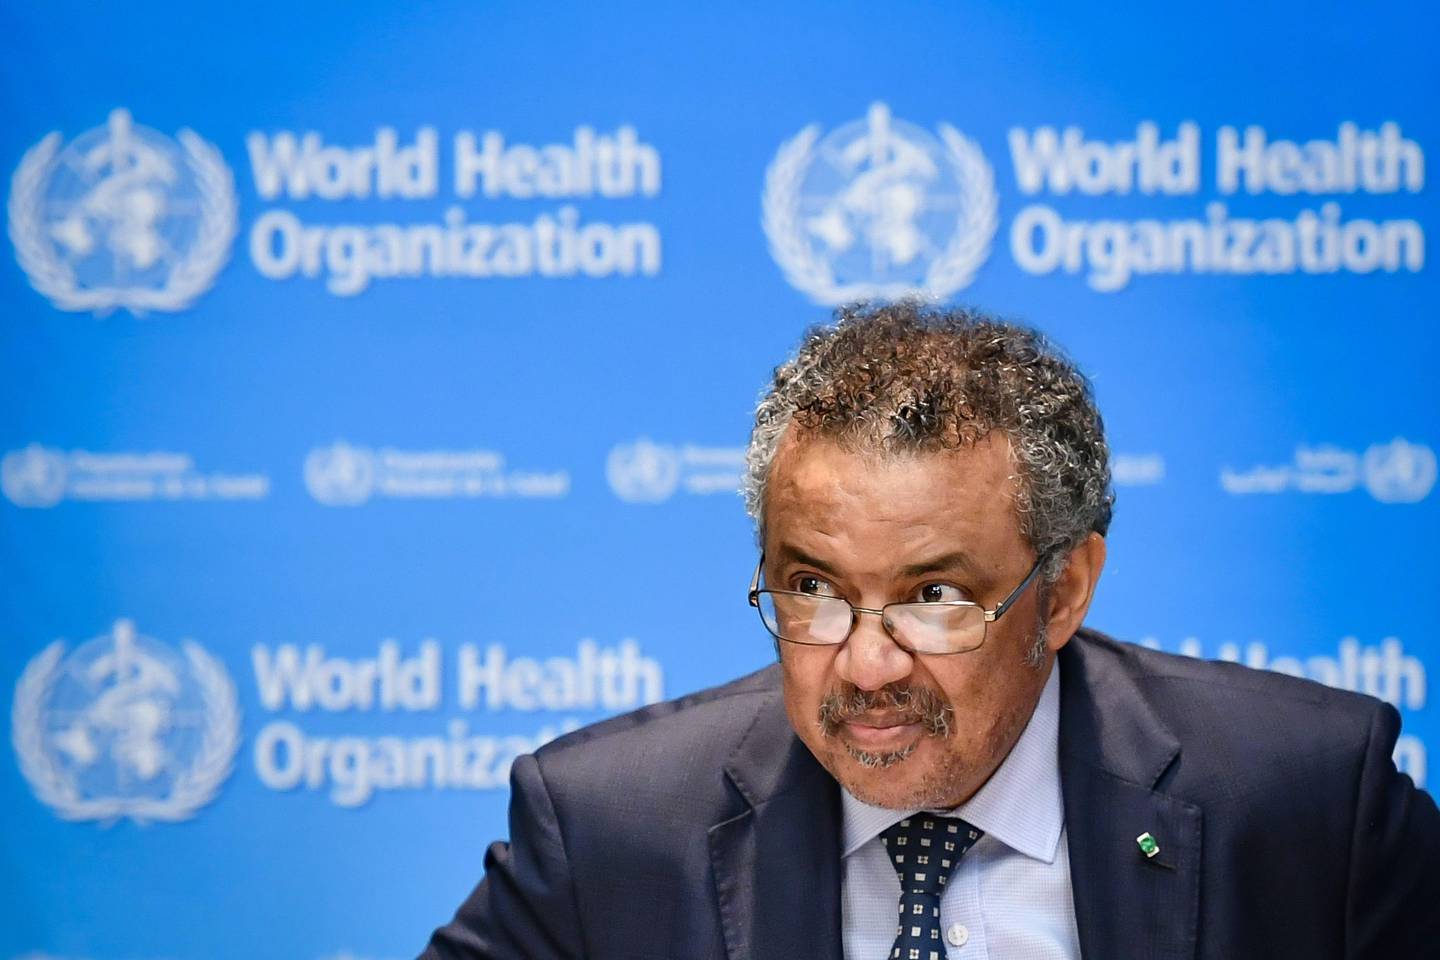 World Health Organization (WHO) Director-General Tedros Adhanom Ghebreyesus attends a press conference following an emergency committee meeting over Ebola epidemic in Democratic Republic of Congo at the WHO headquarters in Geneva on October 18, 2019. (Photo by Fabrice COFFRINI / AFP)